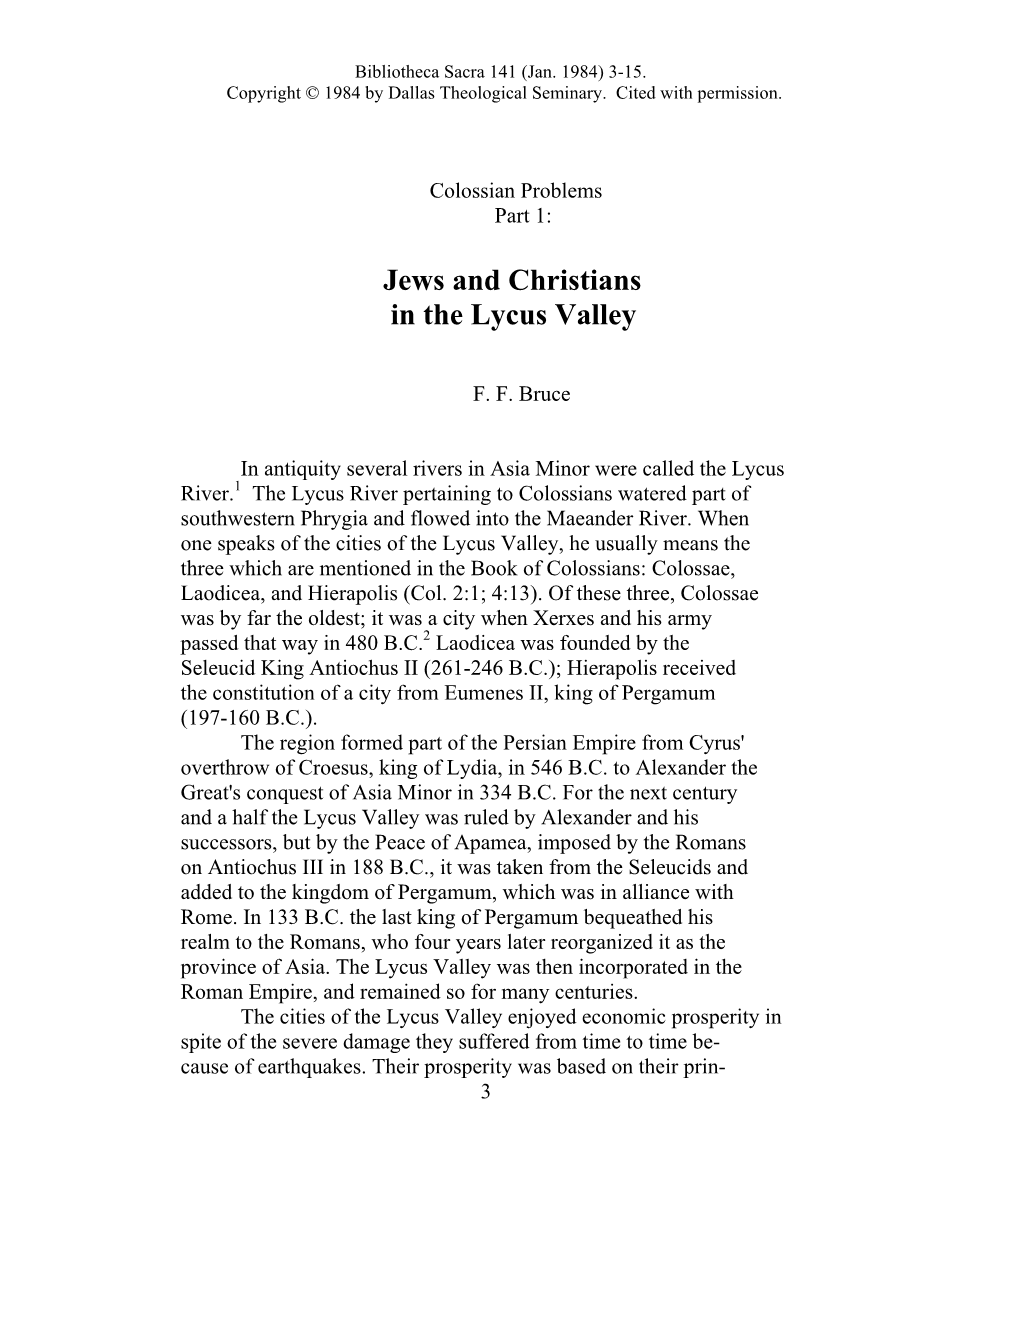 Jews and Christians in the Lycus Valley: Colossians Problems, Pt. 1